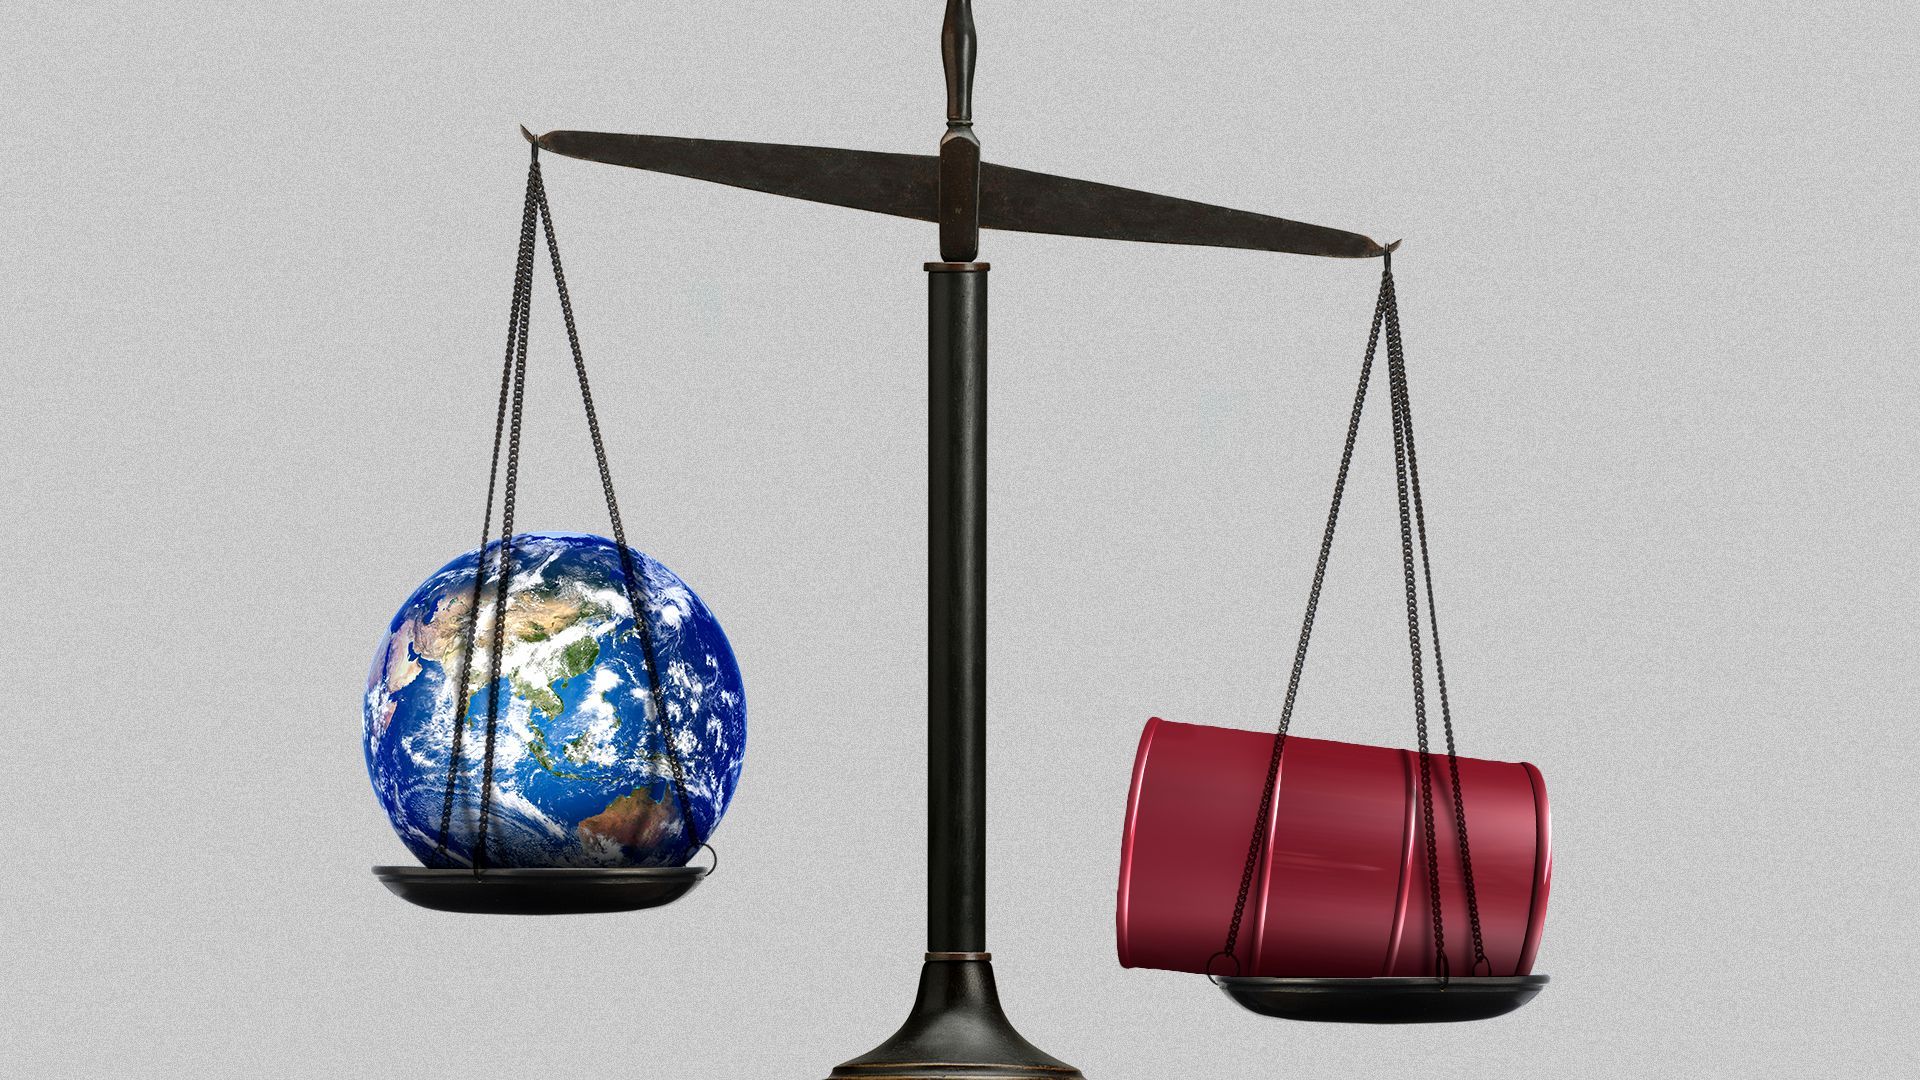 Illustration of a justice scale weighing the earth and a barrel of oil